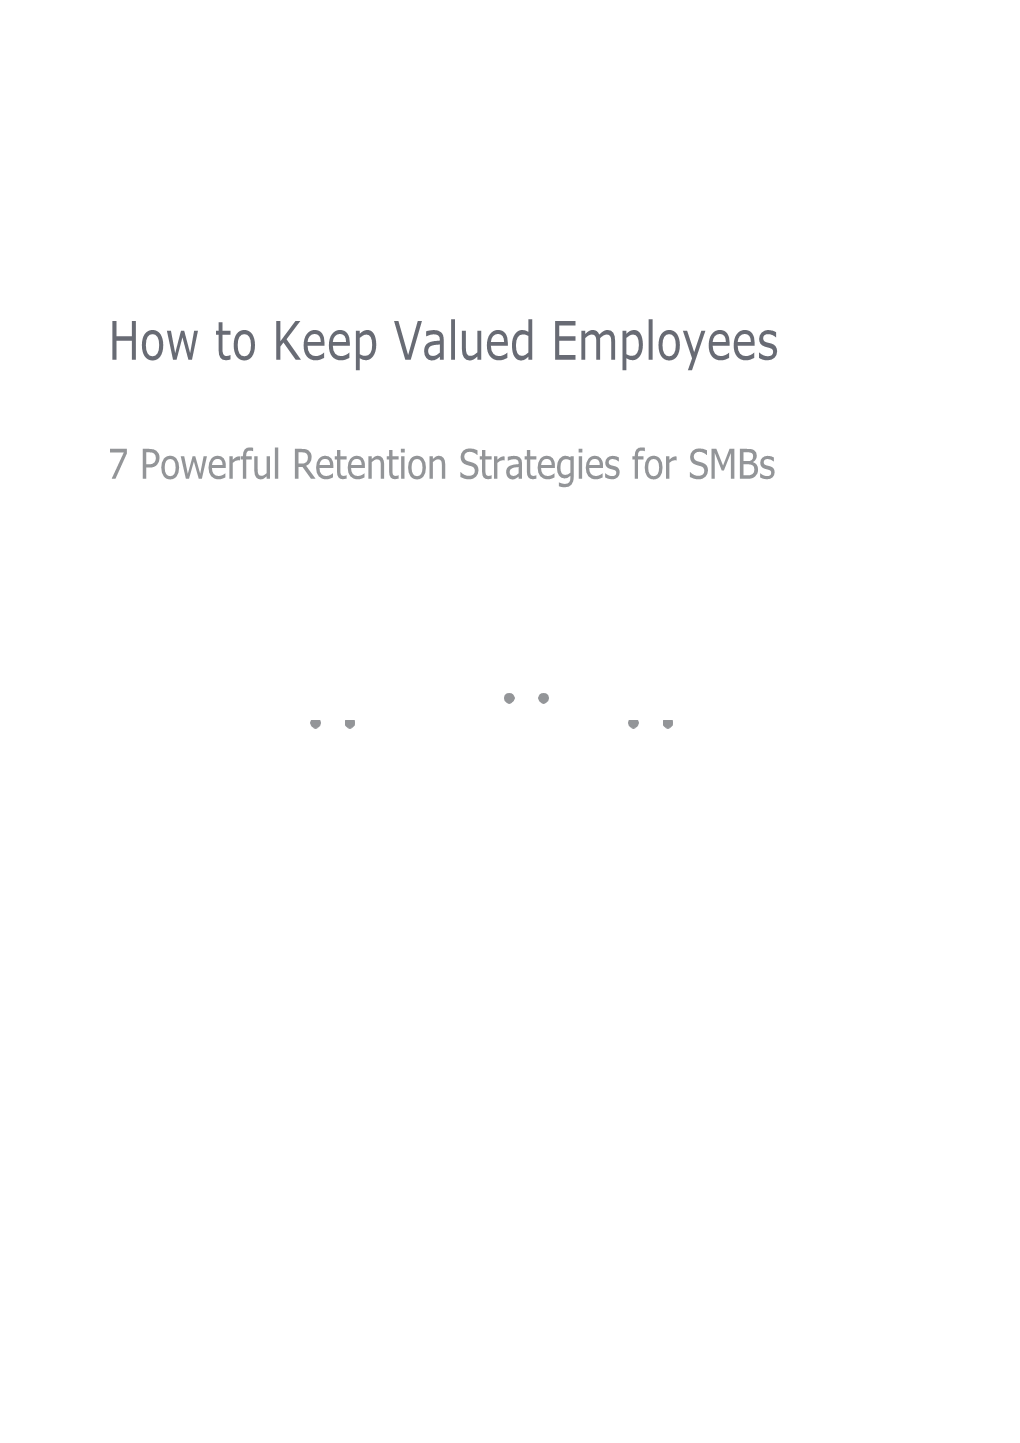 How to Keep Valued Employees